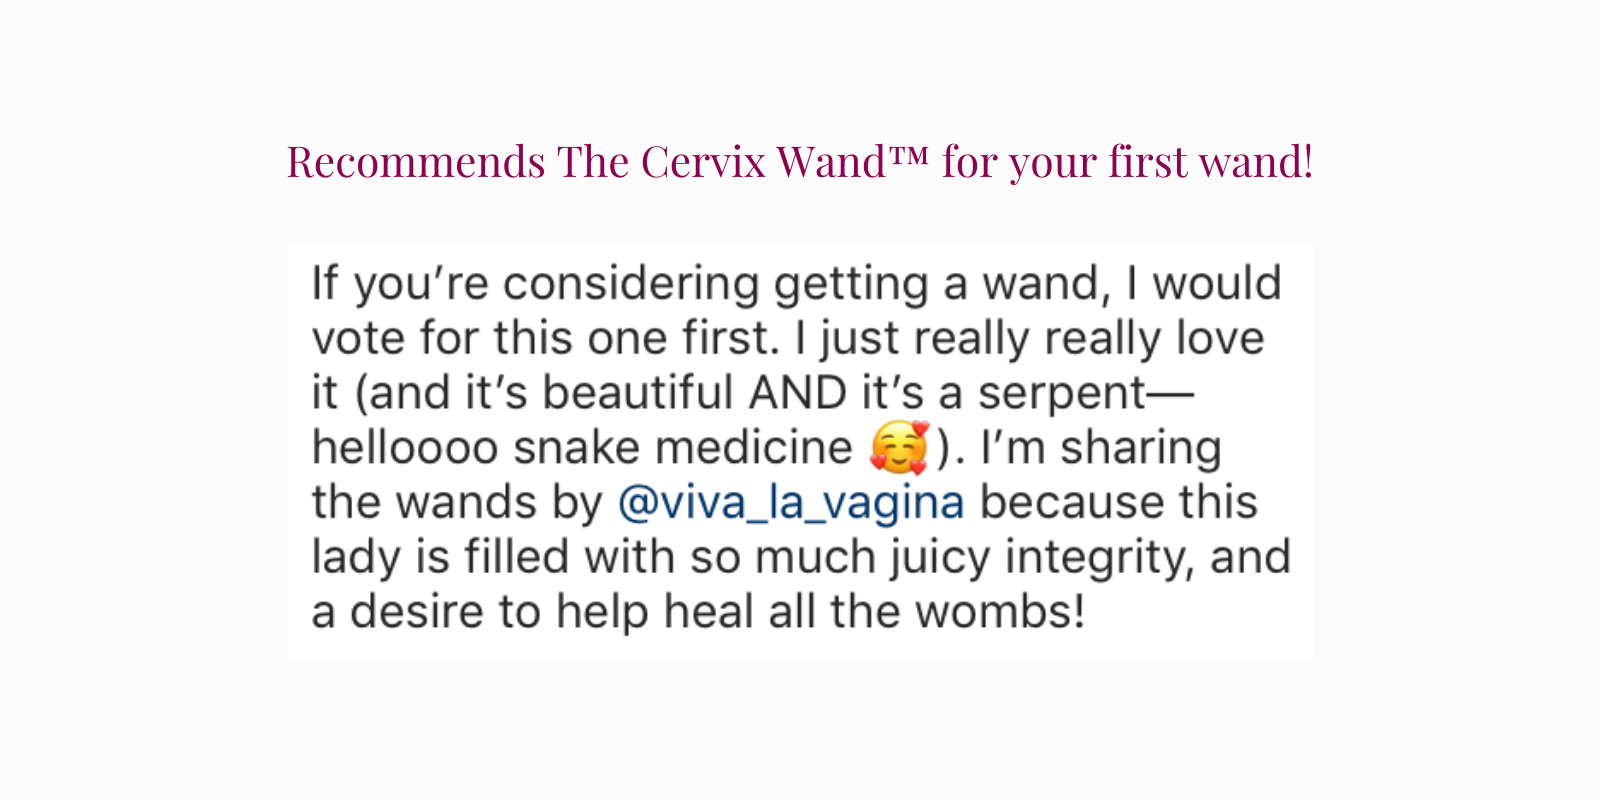 The Cervix Wand